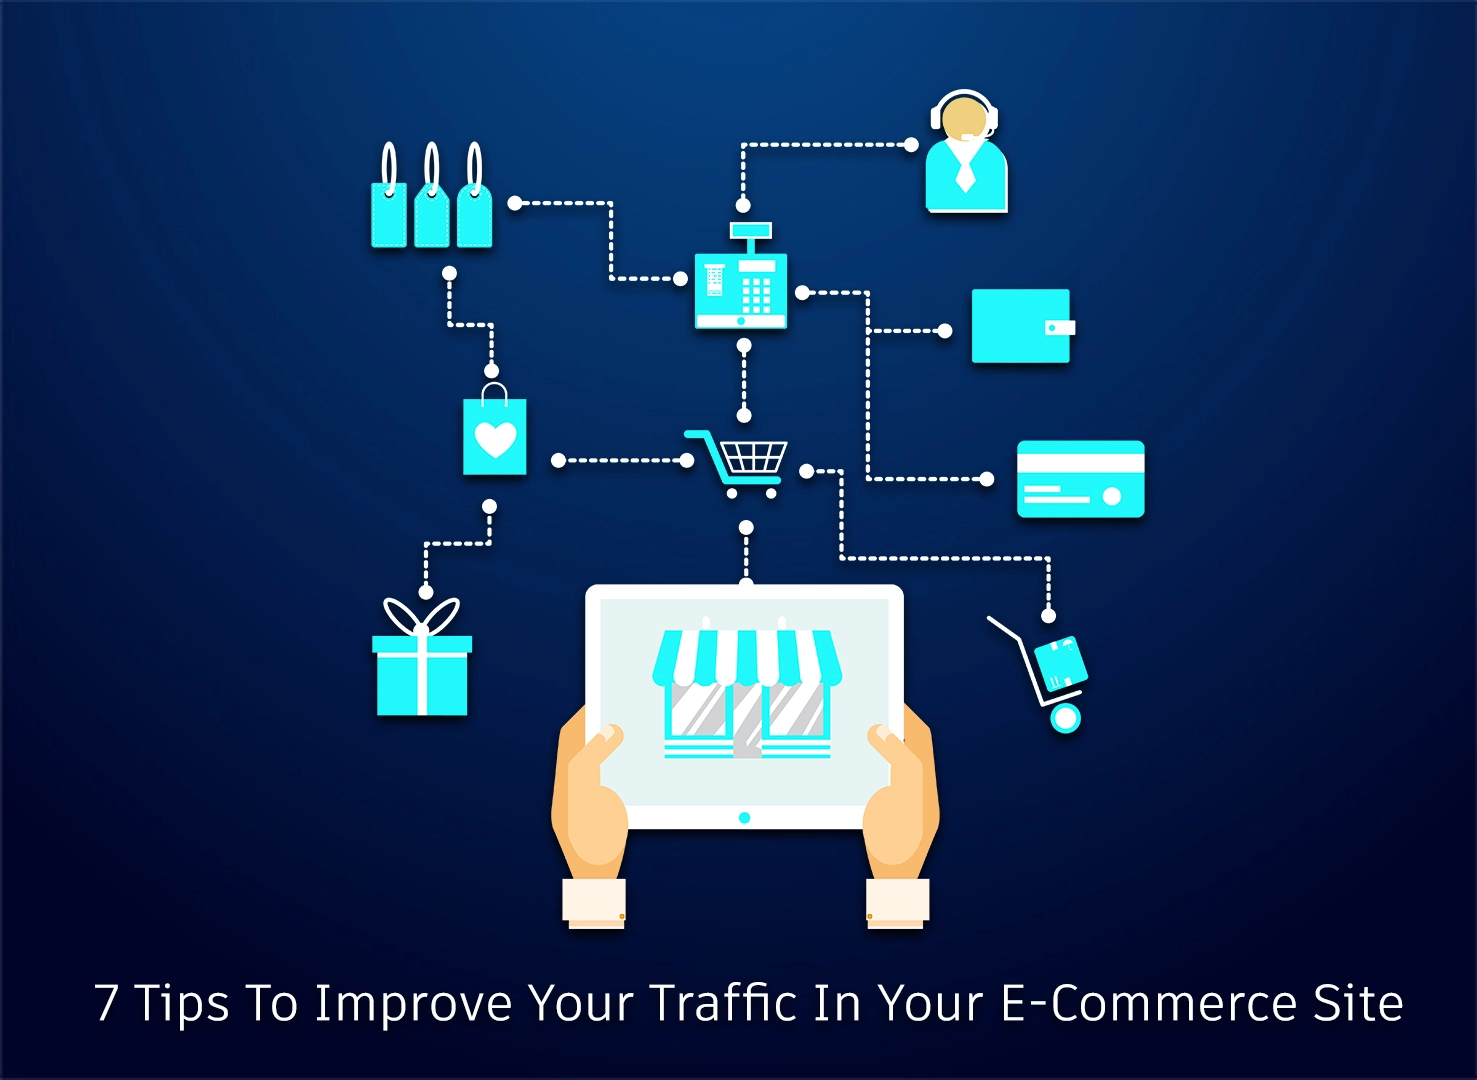 7 Tips to Improve Your Traffic on Your eCommerce Site